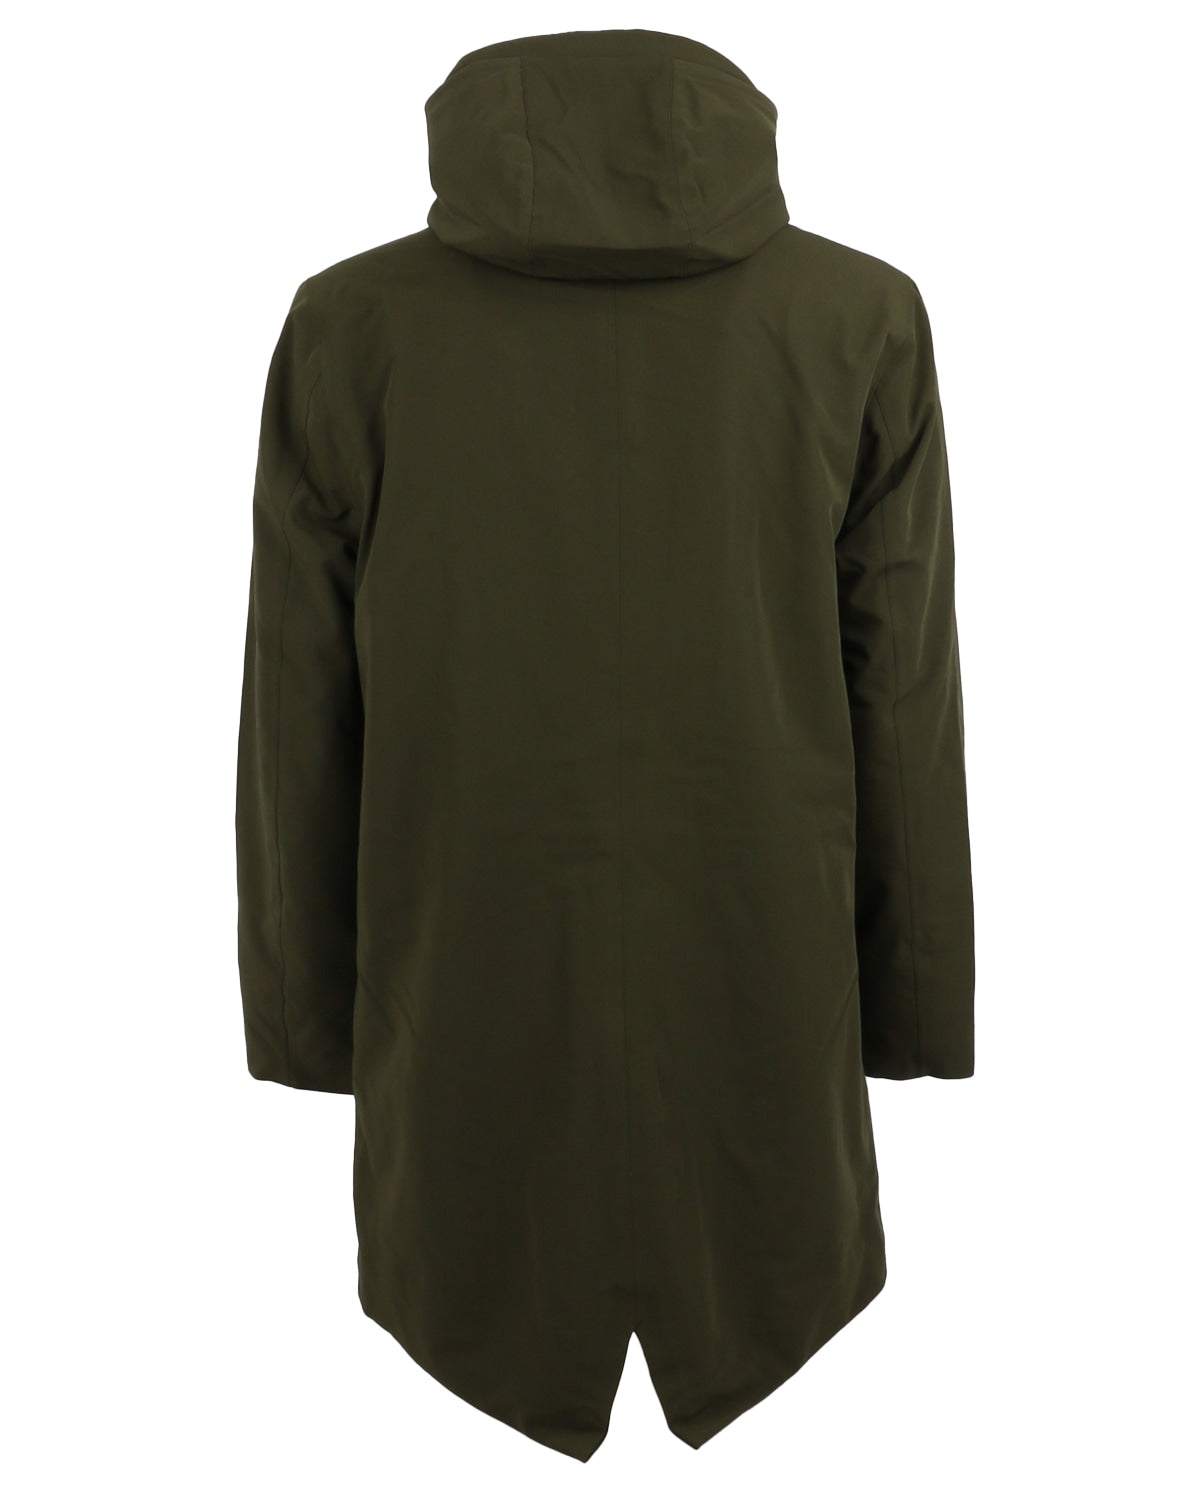 welter shelter_terror weather parka_deep army_2_5